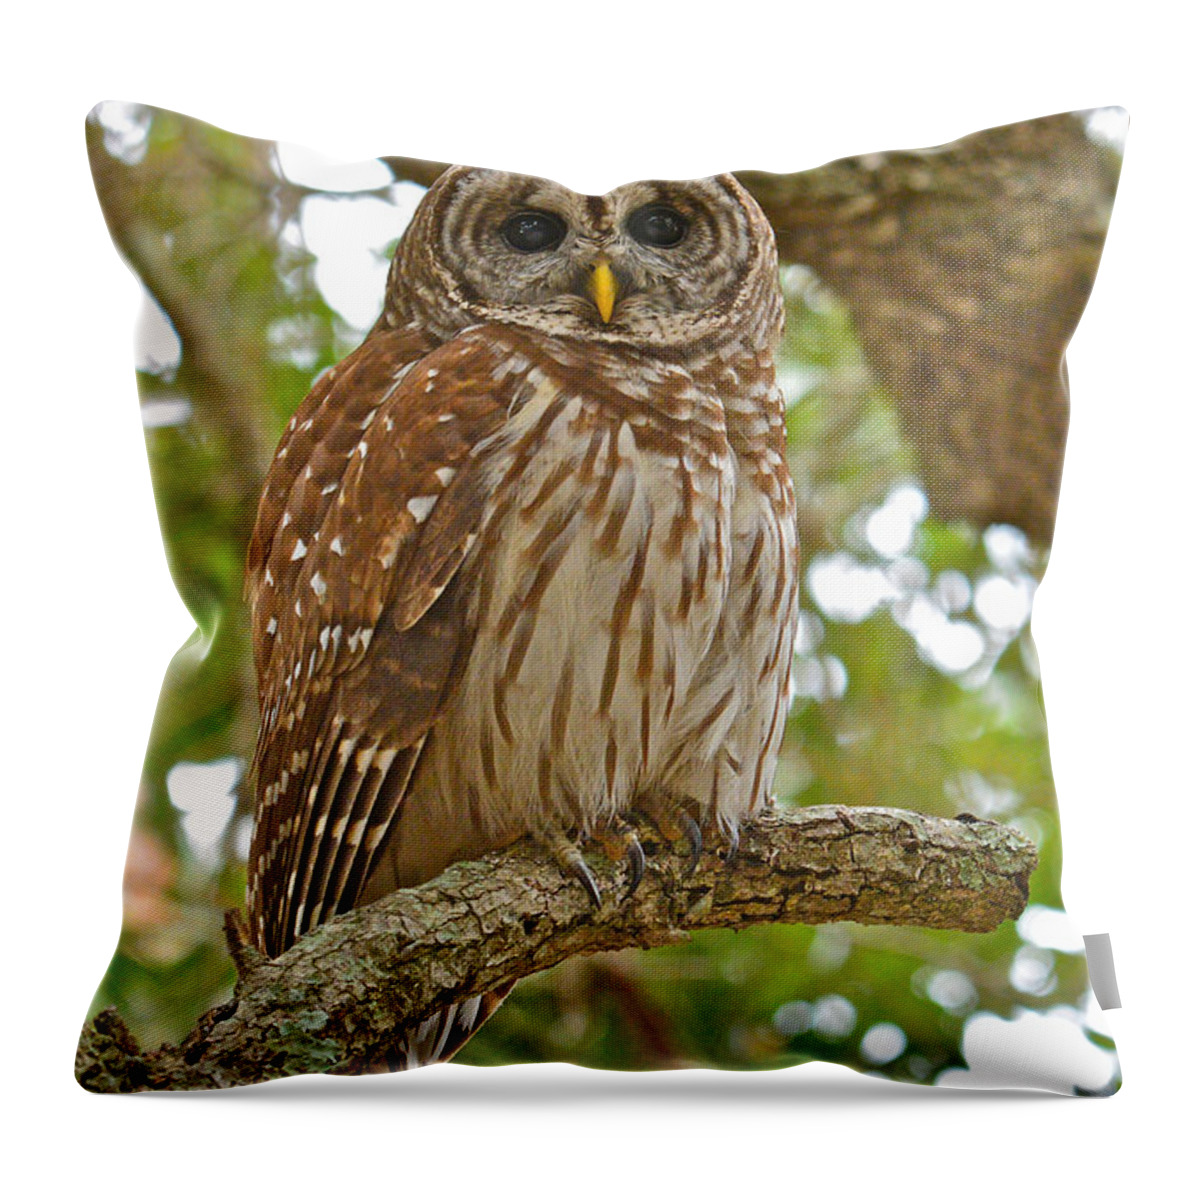 Barred Owl Throw Pillow featuring the photograph A Barred Owl by Don Mercer